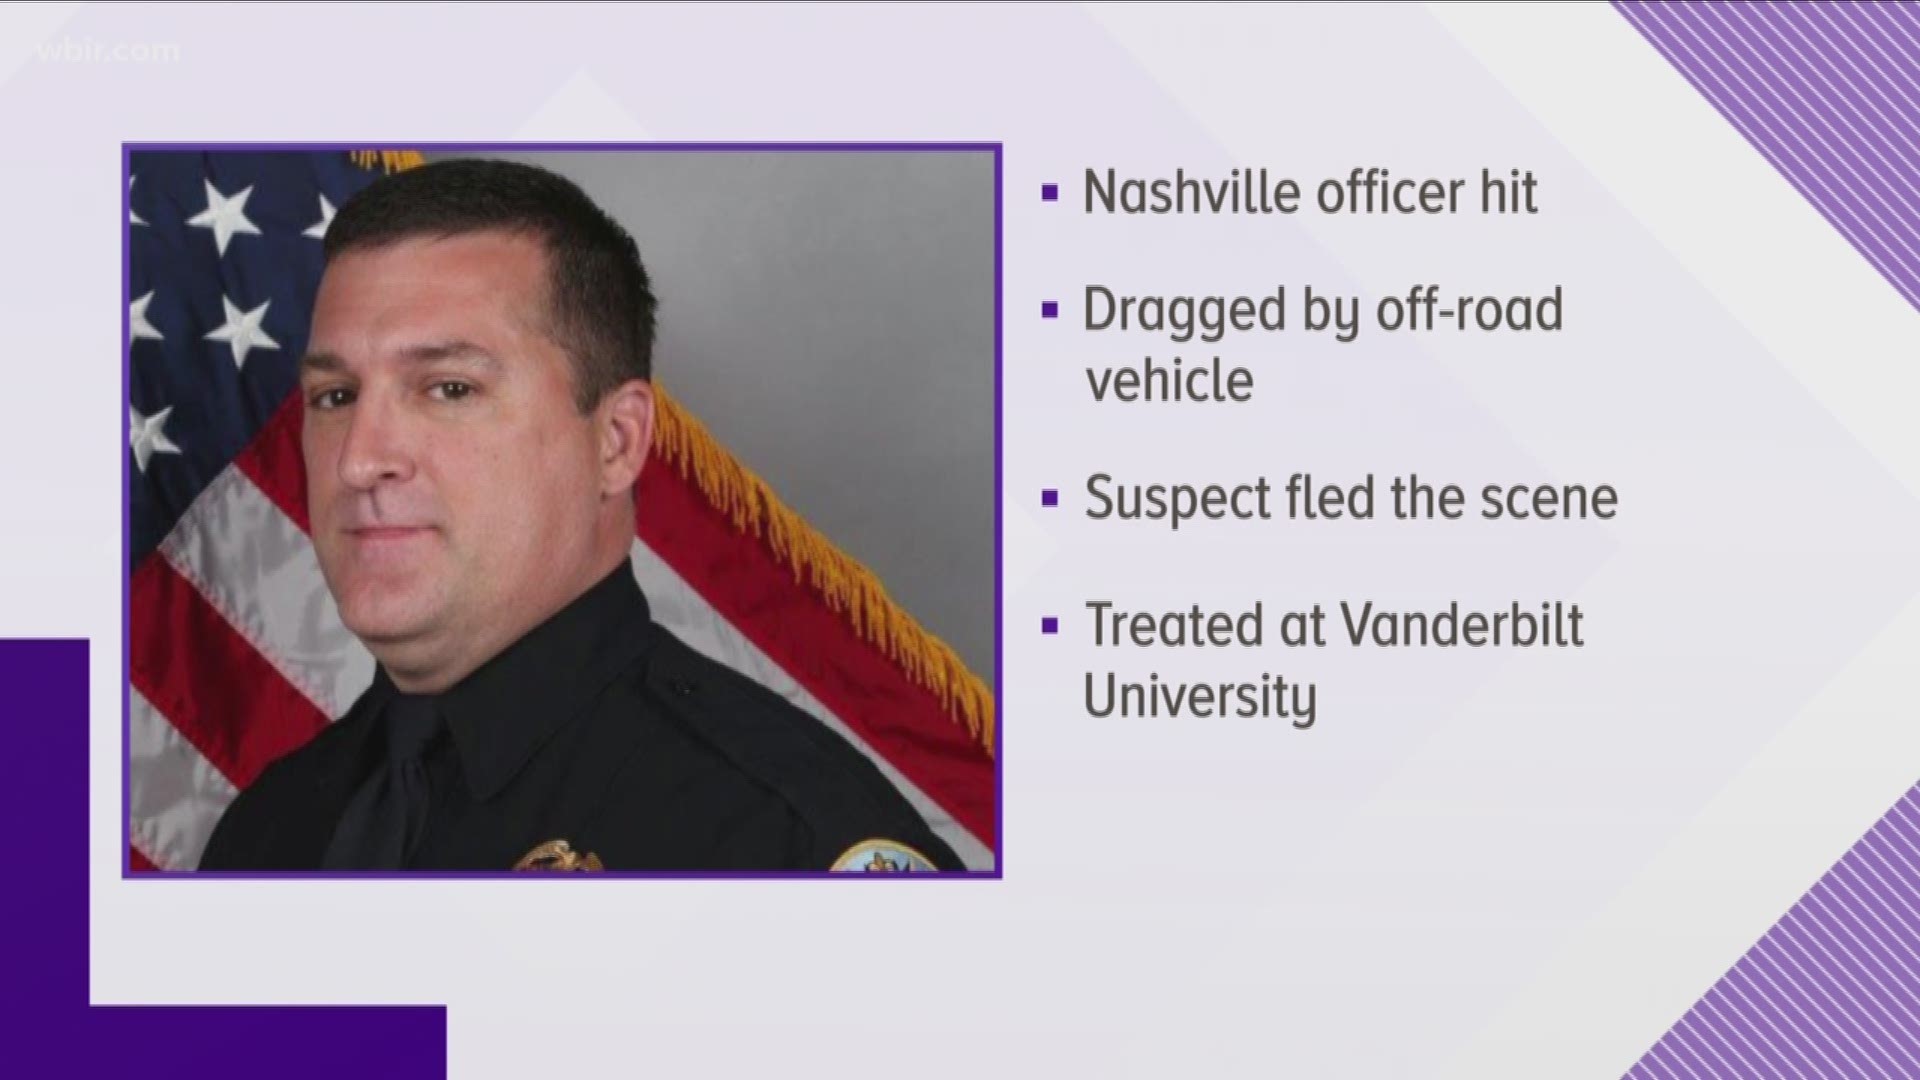 A police officer in Nashville is recovering after being hit by a group of off road vehicles yesterday afternoon.